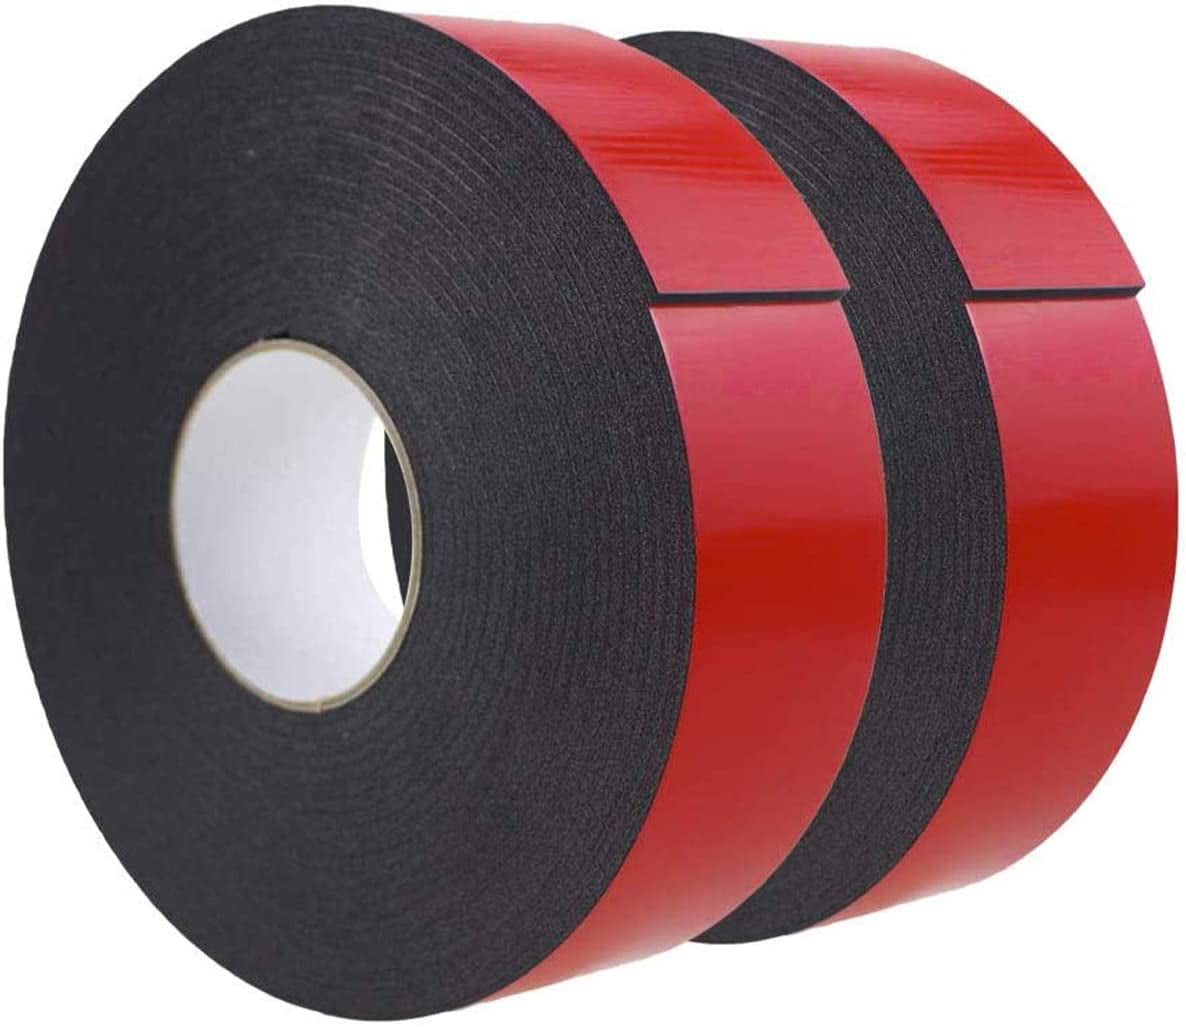 Gorilla Heavy Duty, Extra Long Double Sided Mounting Tape, 1 x 120,  Black, (Pack of 1)